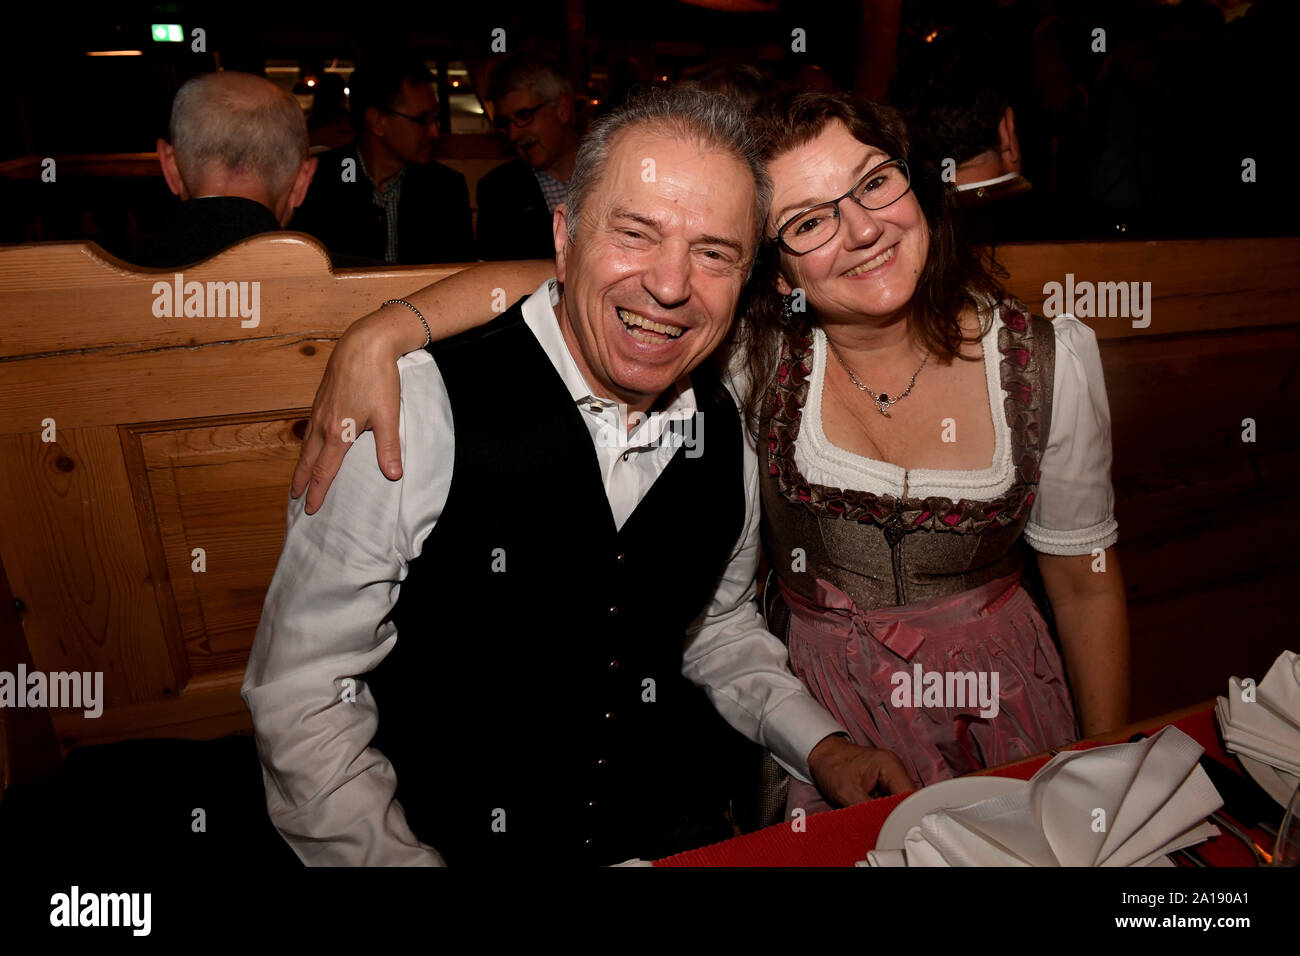 24 September 2019, Bavaria, Munich: Oktoberfest 2019, The musician of the 'Spider Murphy Gang' Günther Sigl and his wife Doris celebrate in the wine tent at the 'Fernsehen mit Herz' Wiesn of Mainstream Media AG. The largest folk festival in the world lasts until 6 October. Photo: Felix Hörhager/dpa Stock Photo